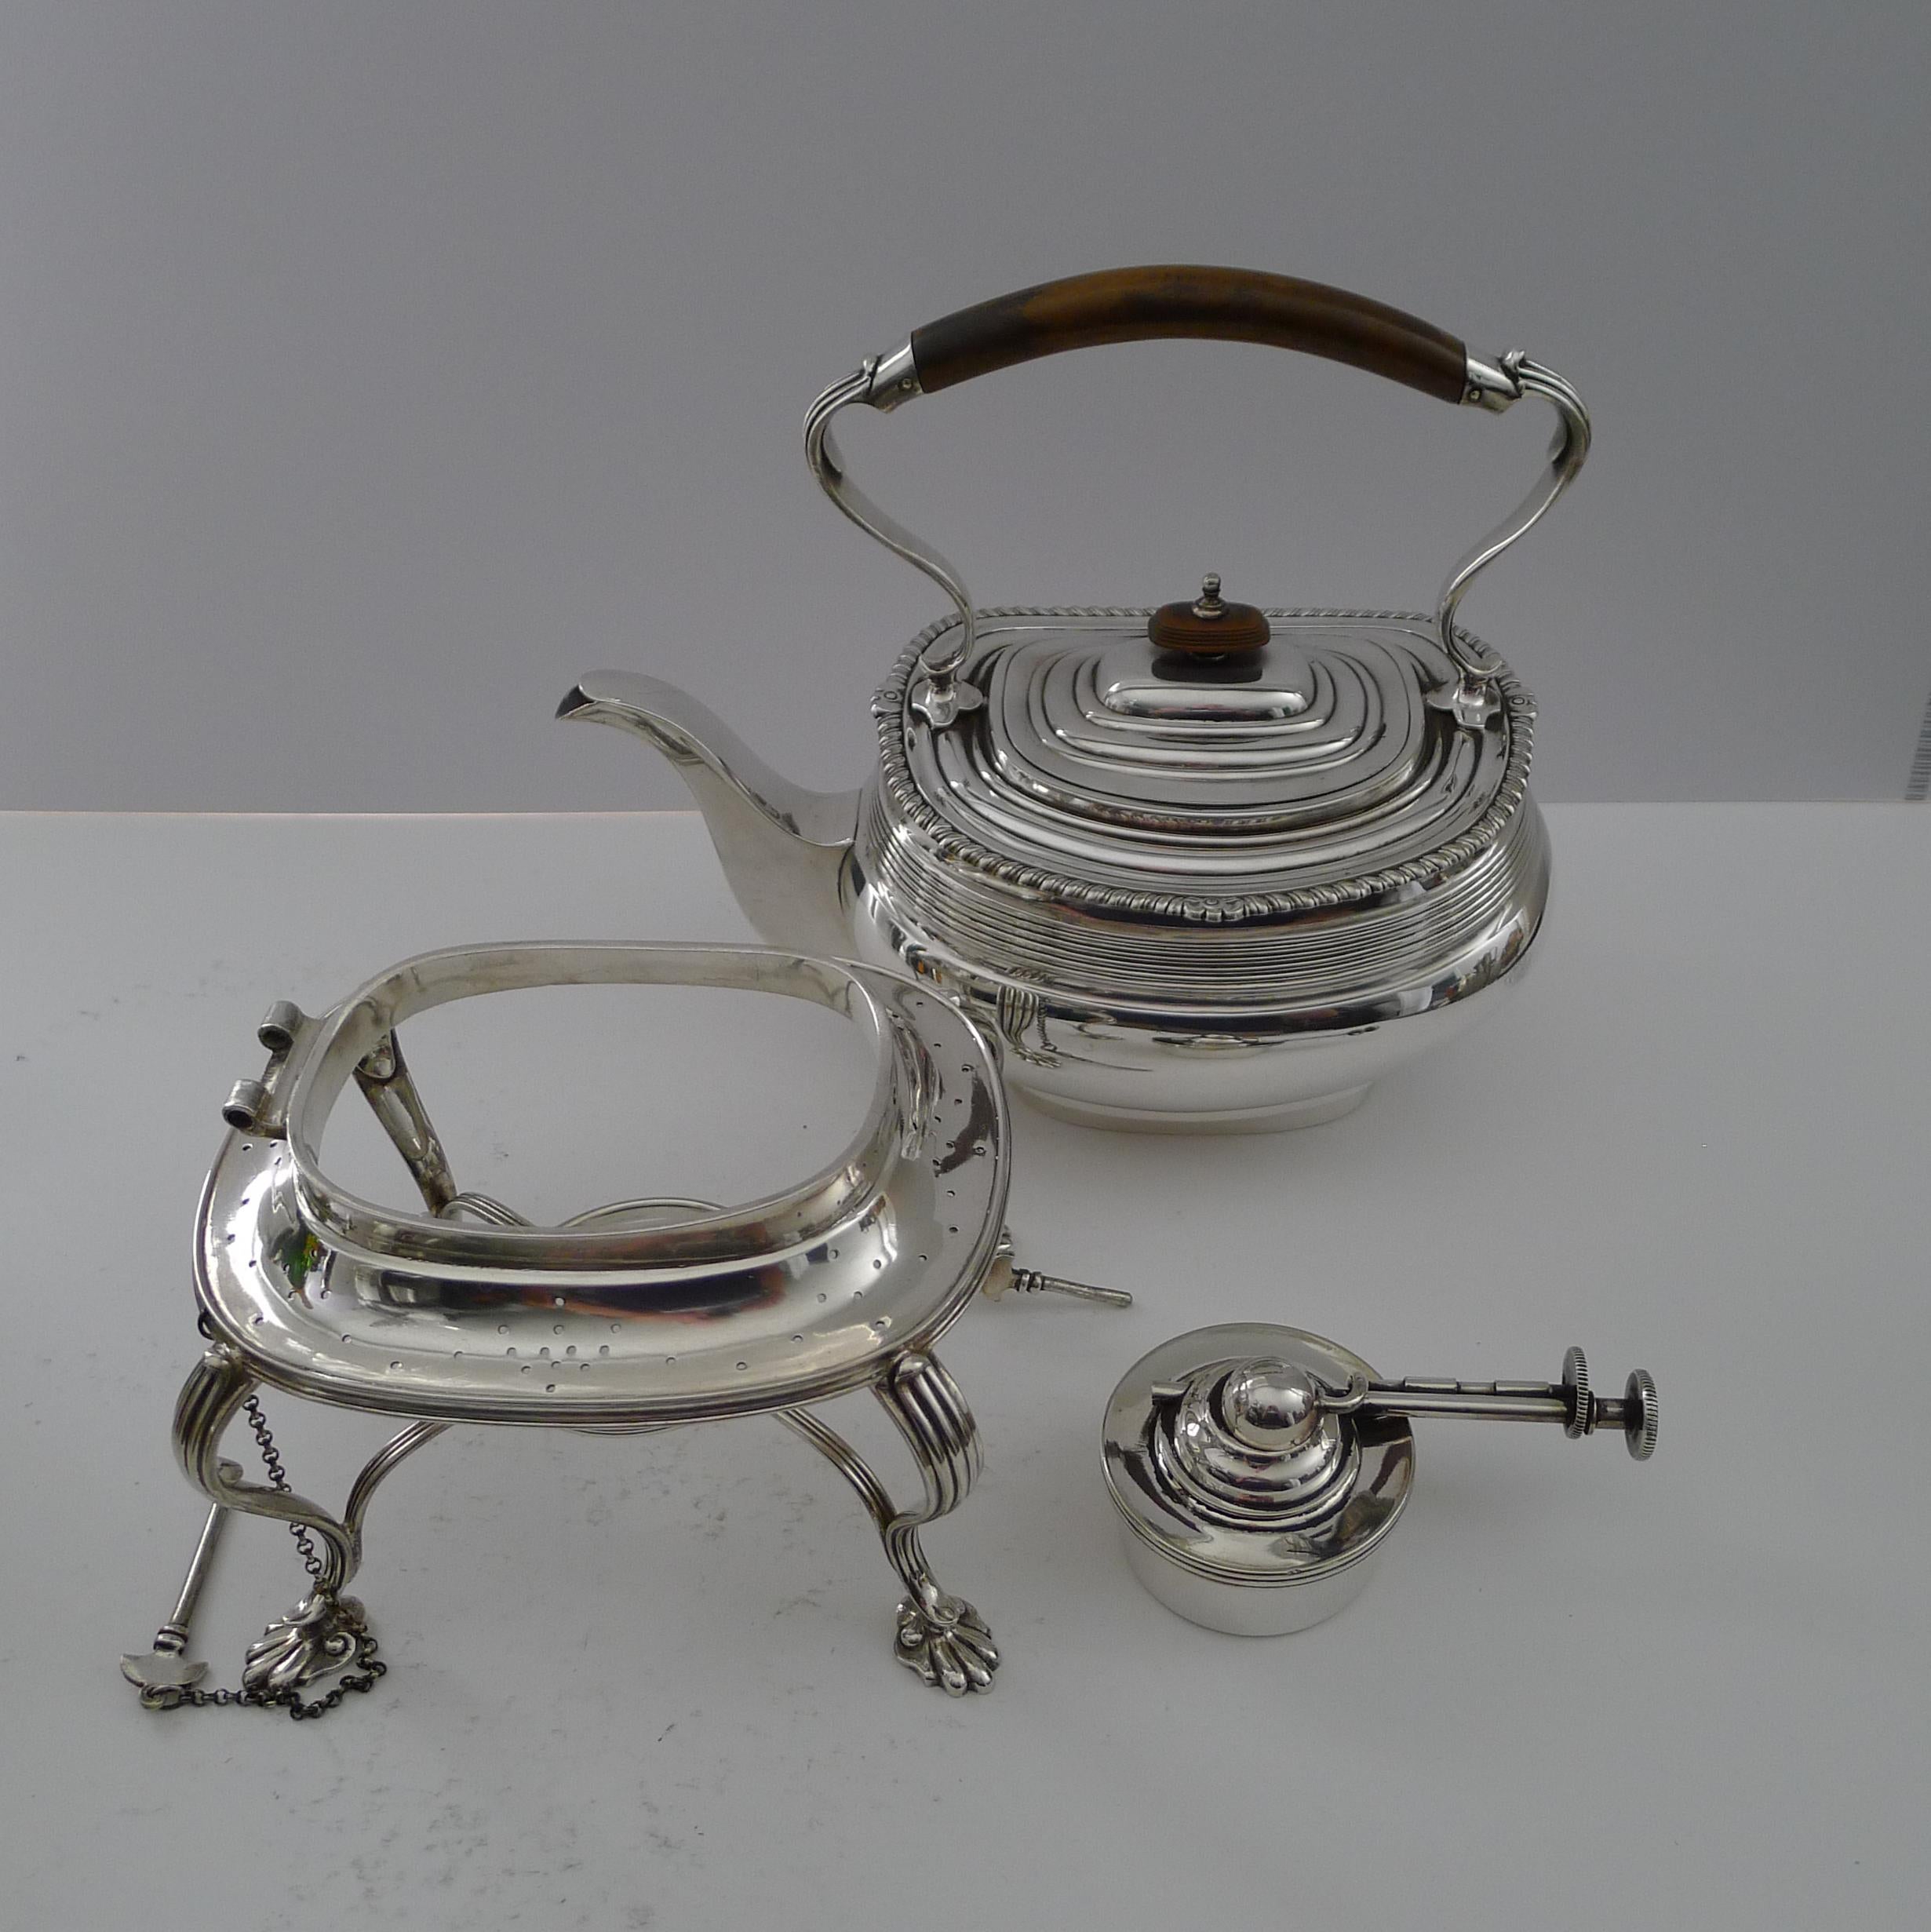 A stunning example of a top quality silver plated spirit kettle and stand made by the top-notch silversmith, Mappin & Webb.  The underside of the kettle is fully marked and is lucky enough to have an English Design Registration number, dating the